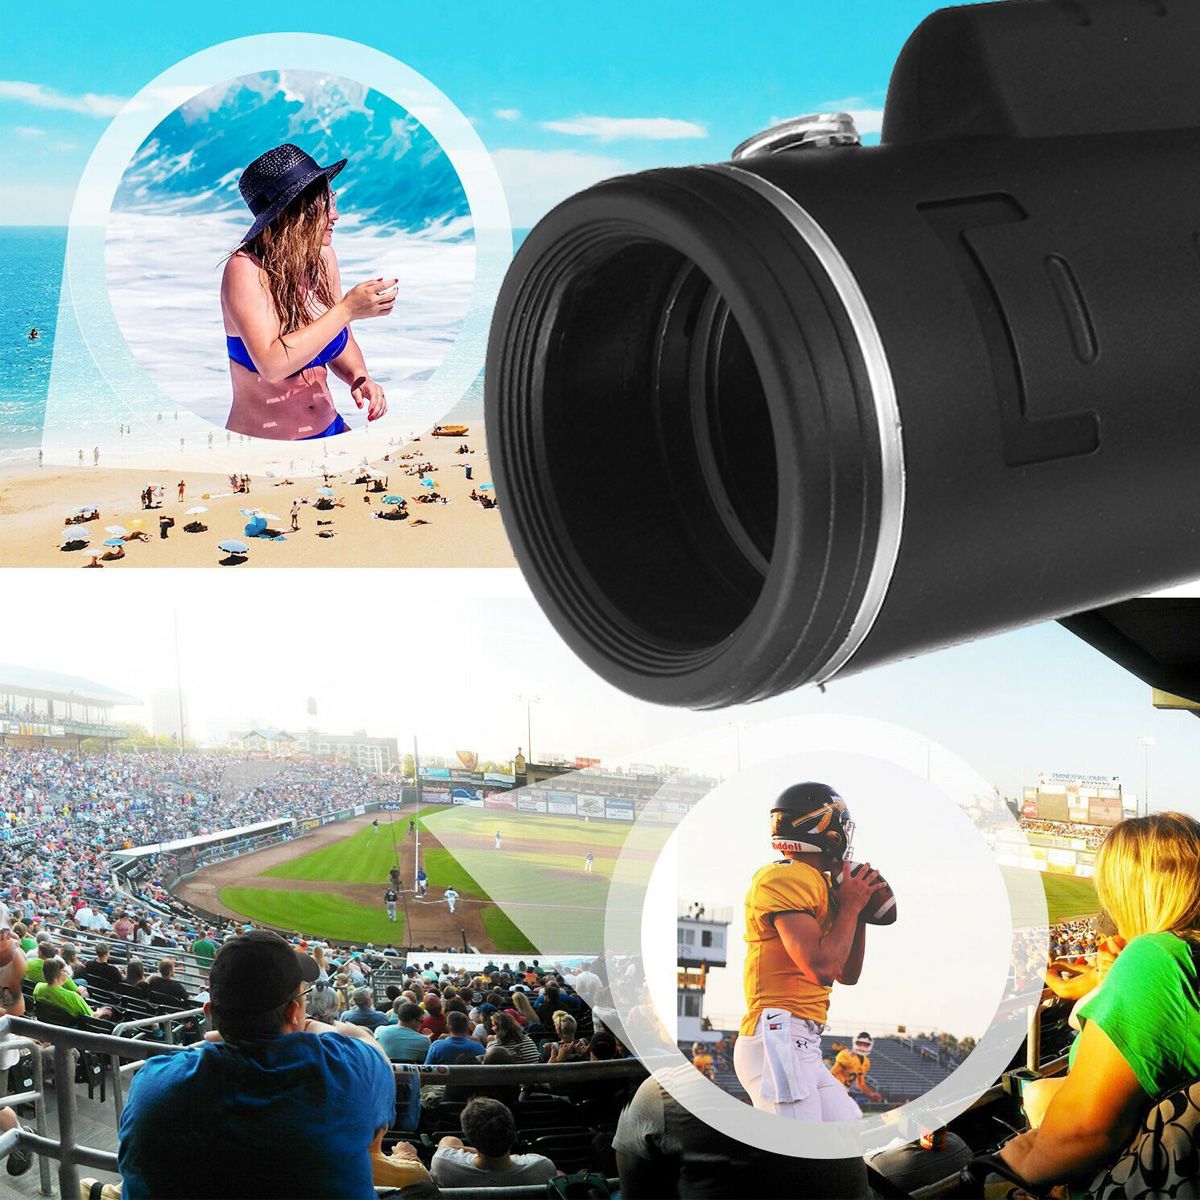 40X60-Telescopes-Zoom-Optical-HD-Monocular-Telescope-for-Outdoor-Travel-Camping-1734711